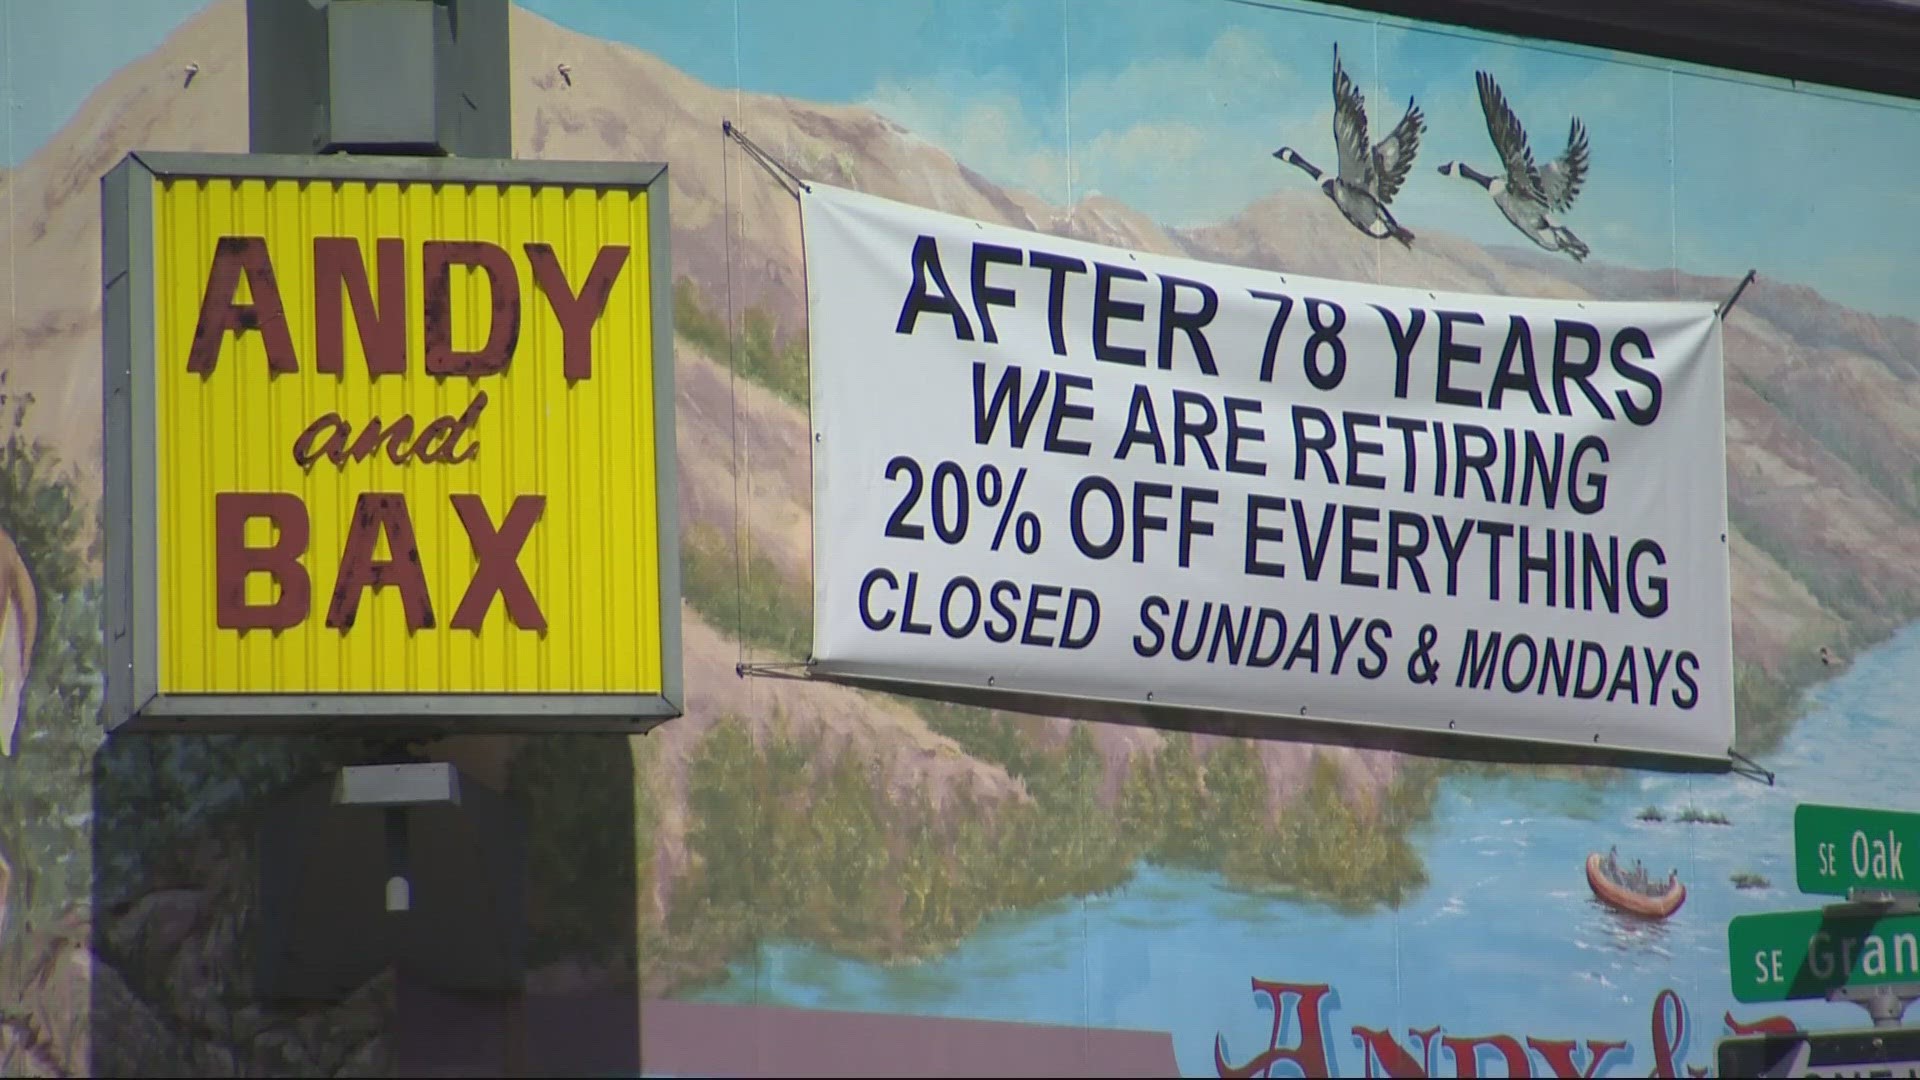 Andy and Bax has been in the Baxter family since the 1940s, but the owners say they've decided to finally hang up their fatigues.